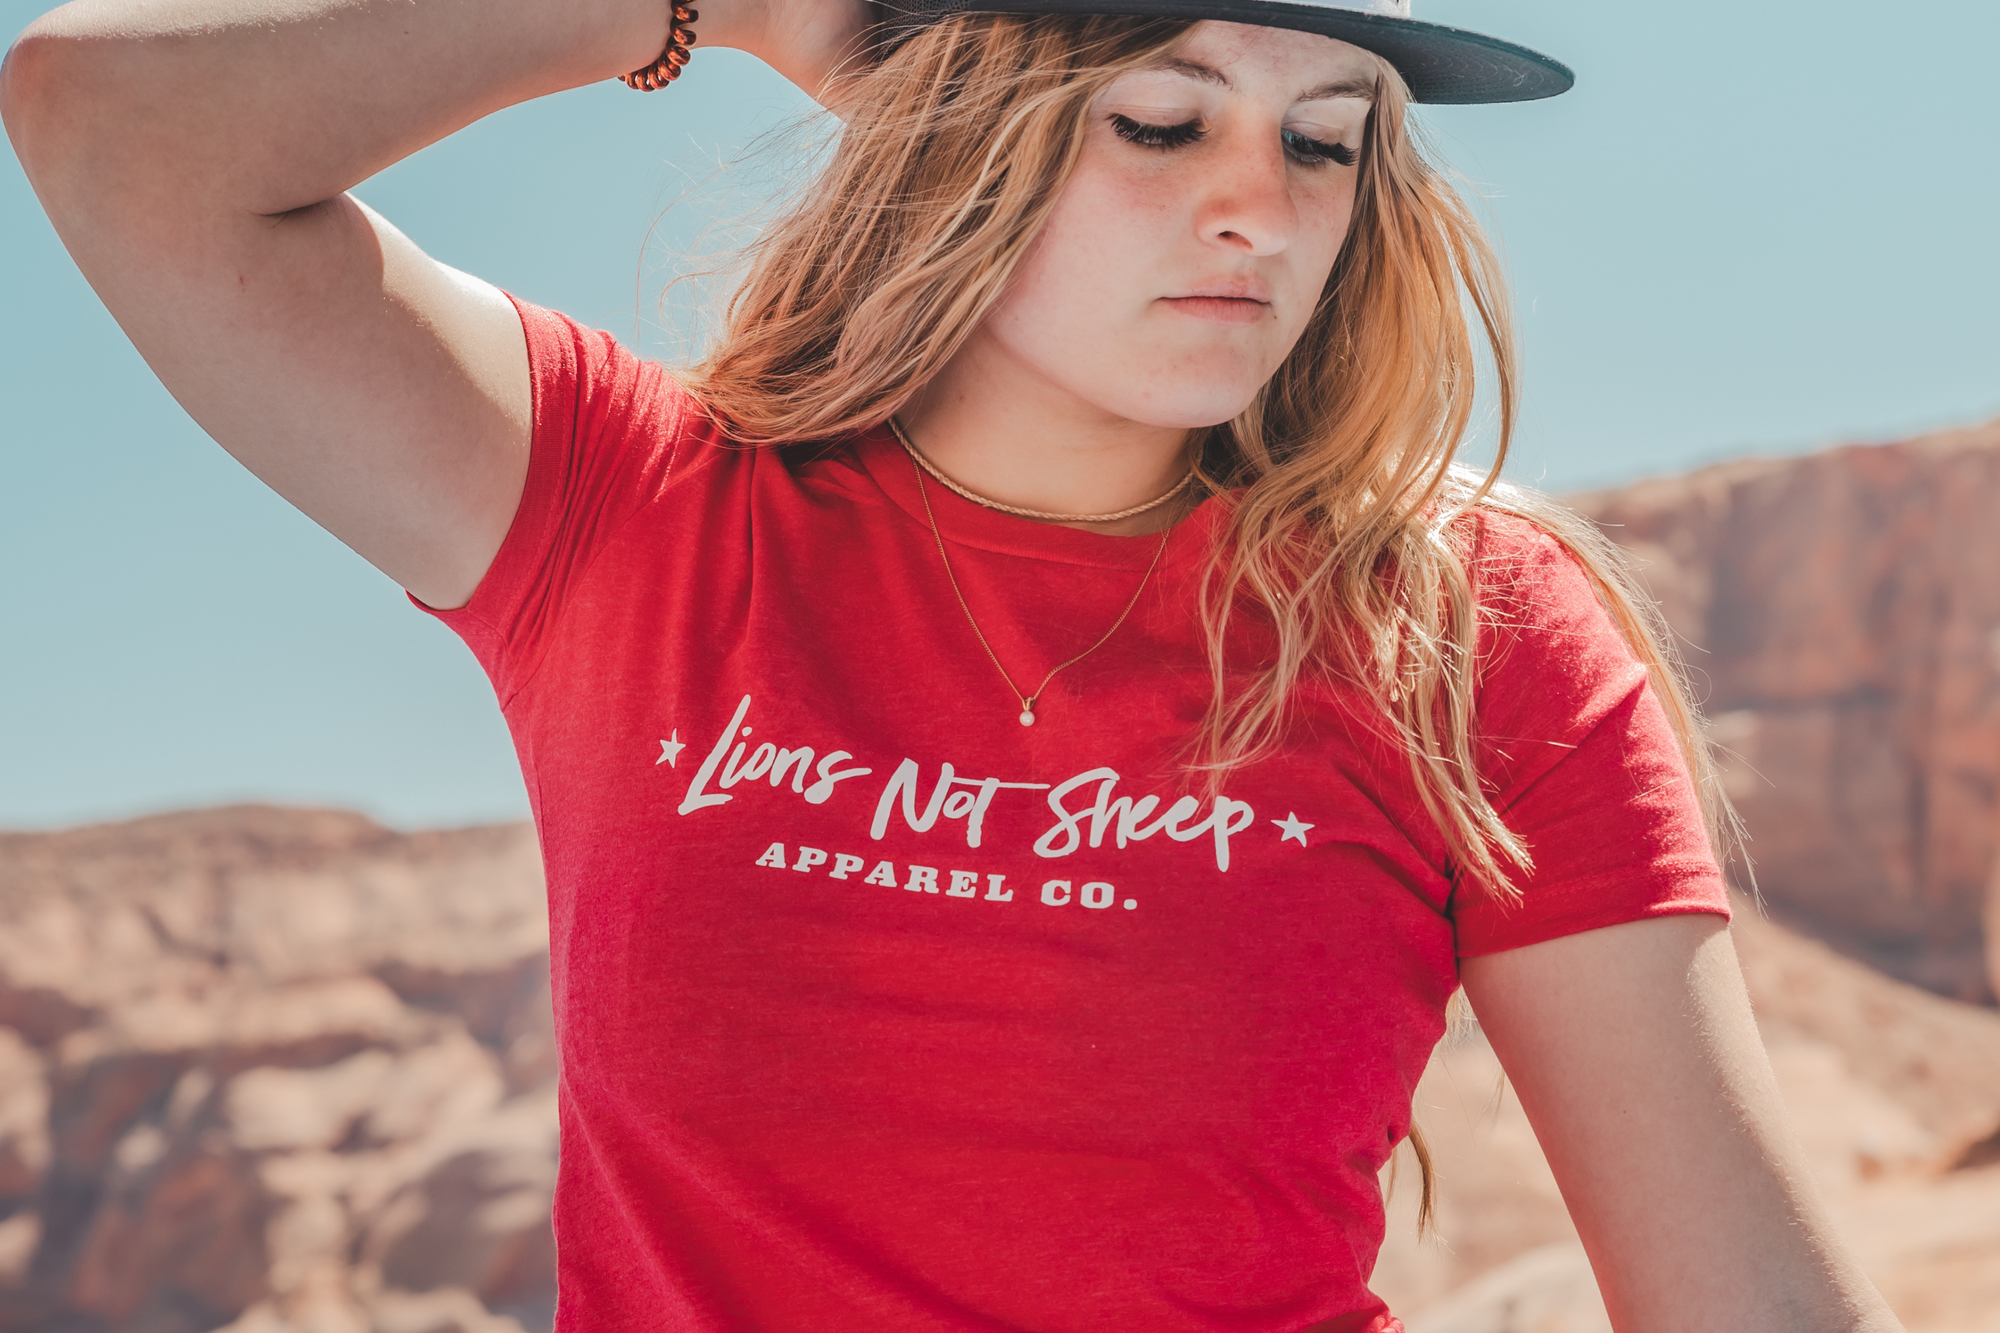 LIONS NOT SHEEP APPAREL CO.